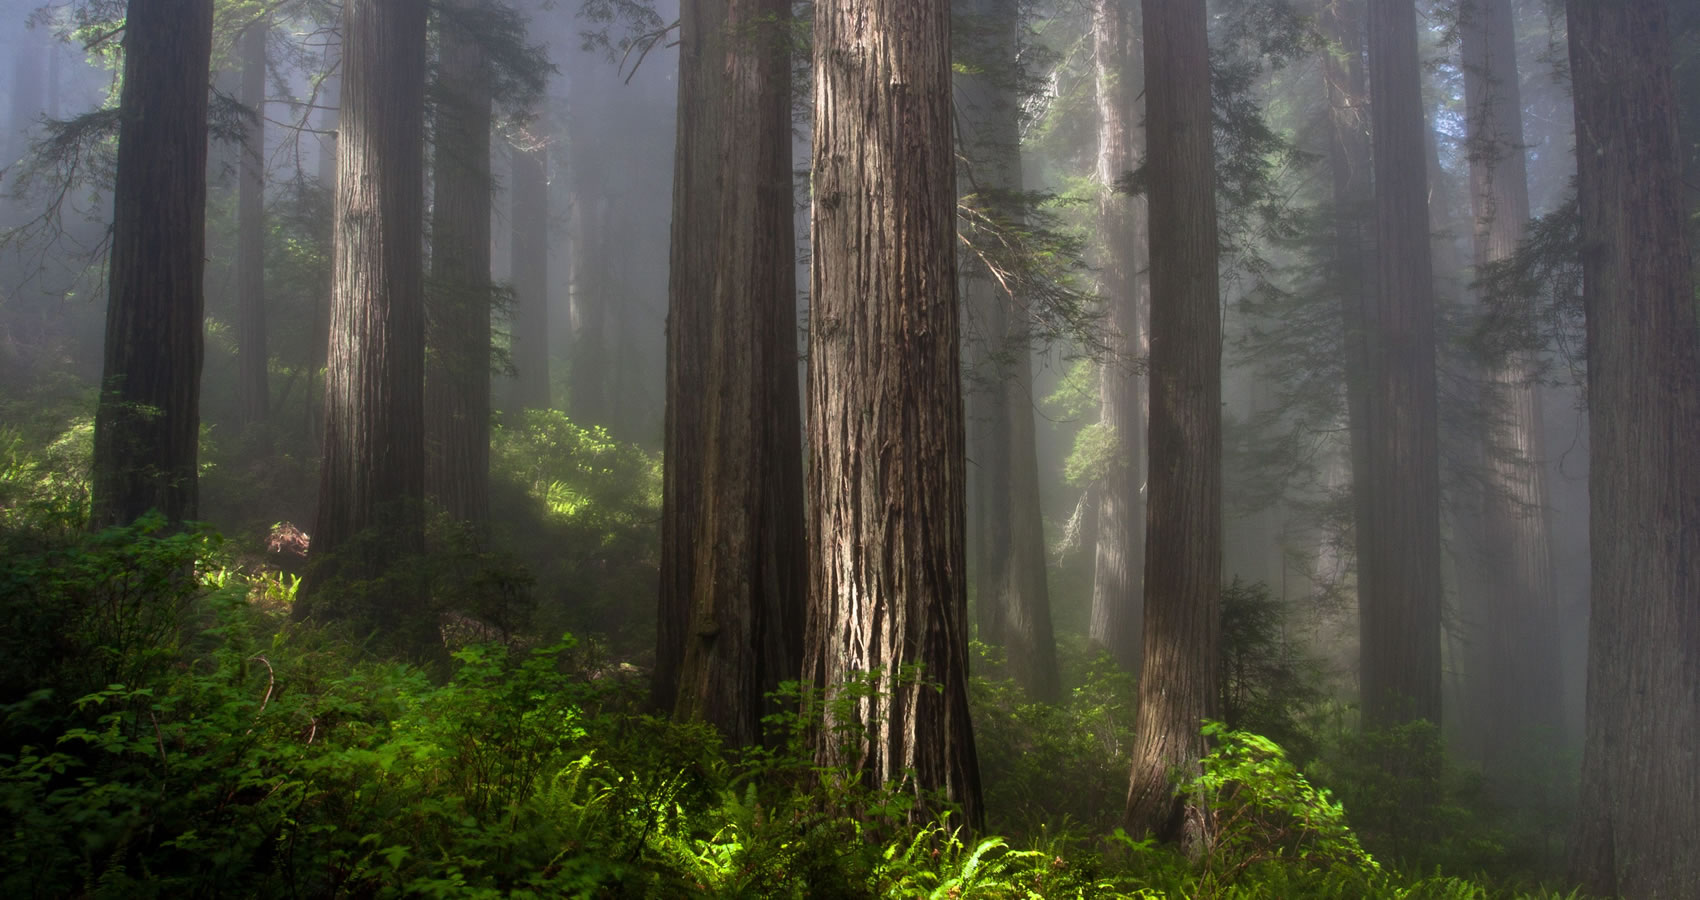 About Redwoods